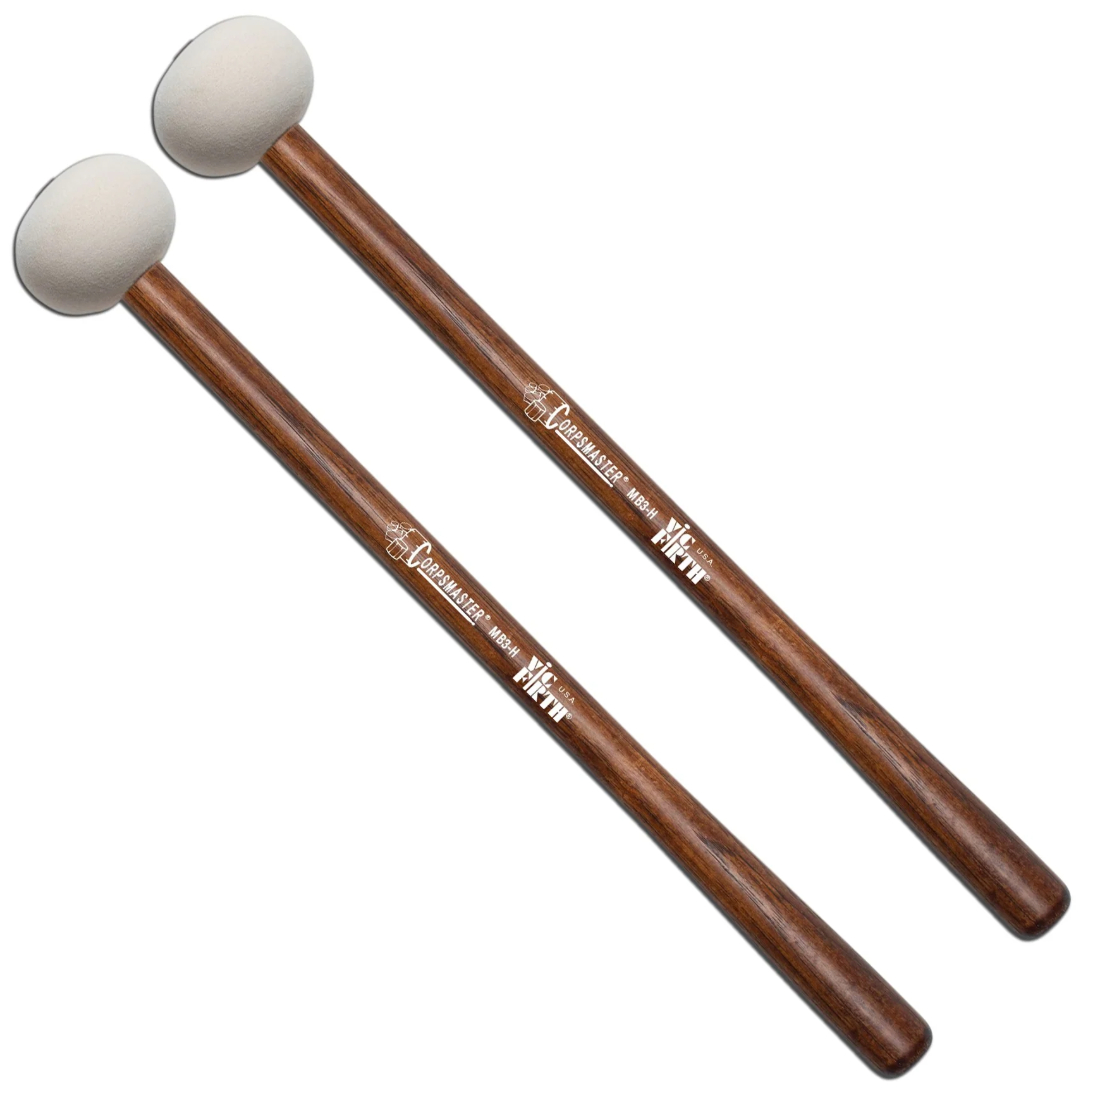 Dark brown Vic Firth marching bass drum mallets with white heads